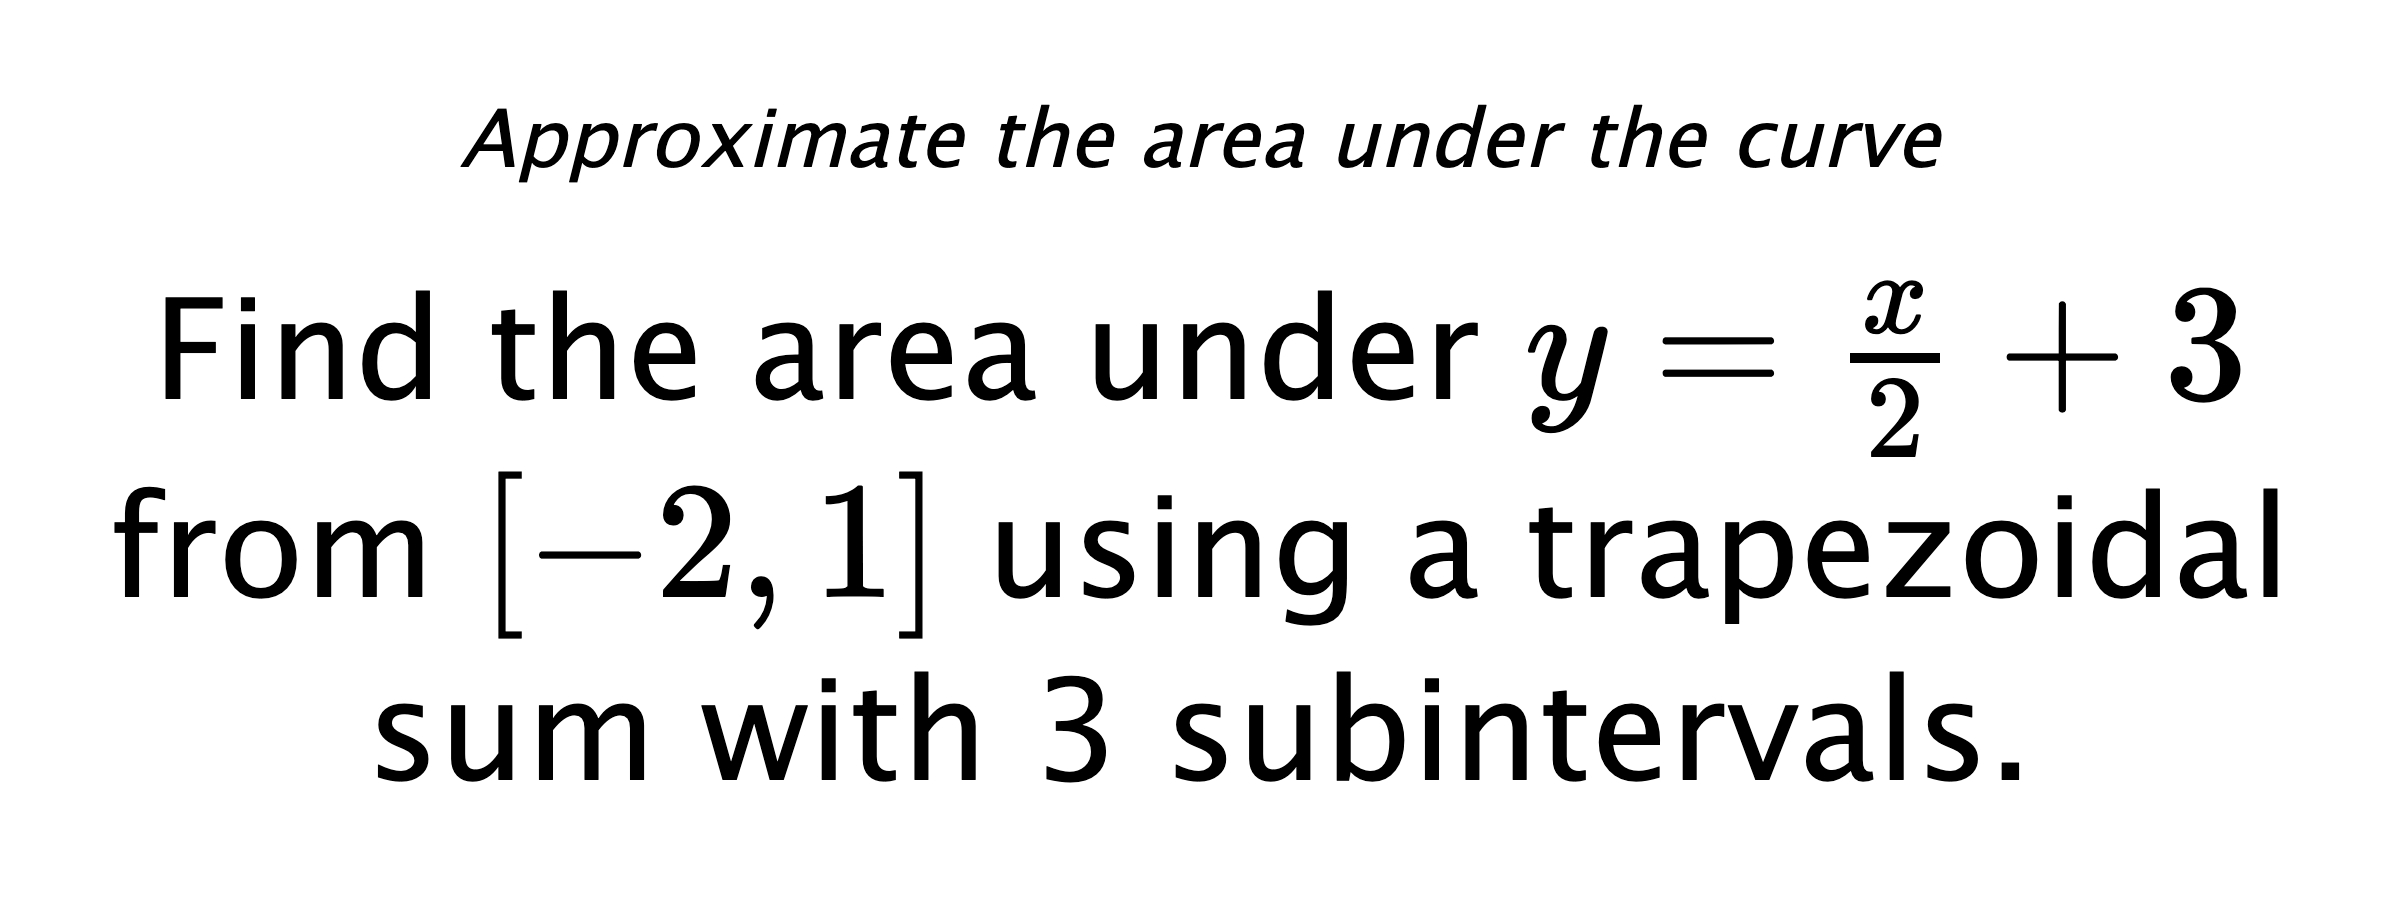 Approximate the area under the curve Find the area under $ y=\frac{x}{2}+3 $ from $ [-2,1] $ using a trapezoidal sum with 3 subintervals.